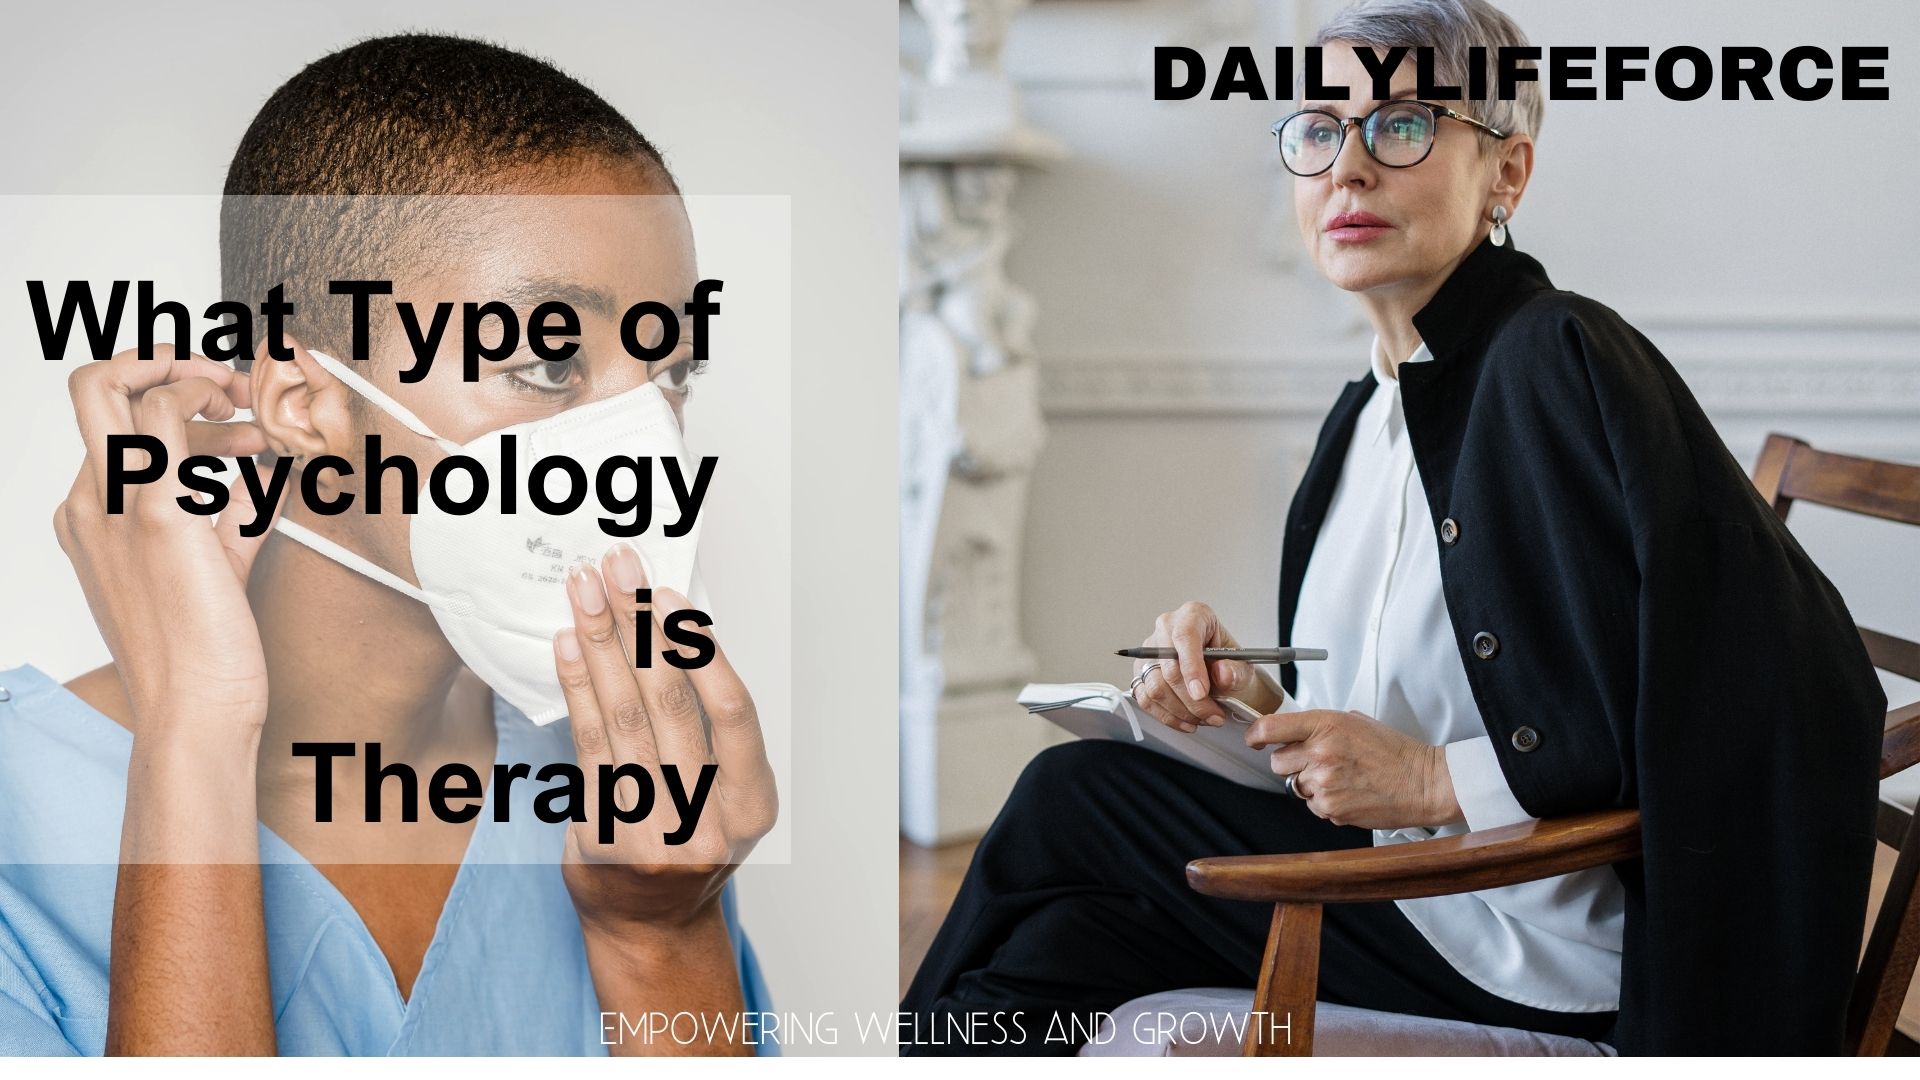 What Type of Psychology is Therapy